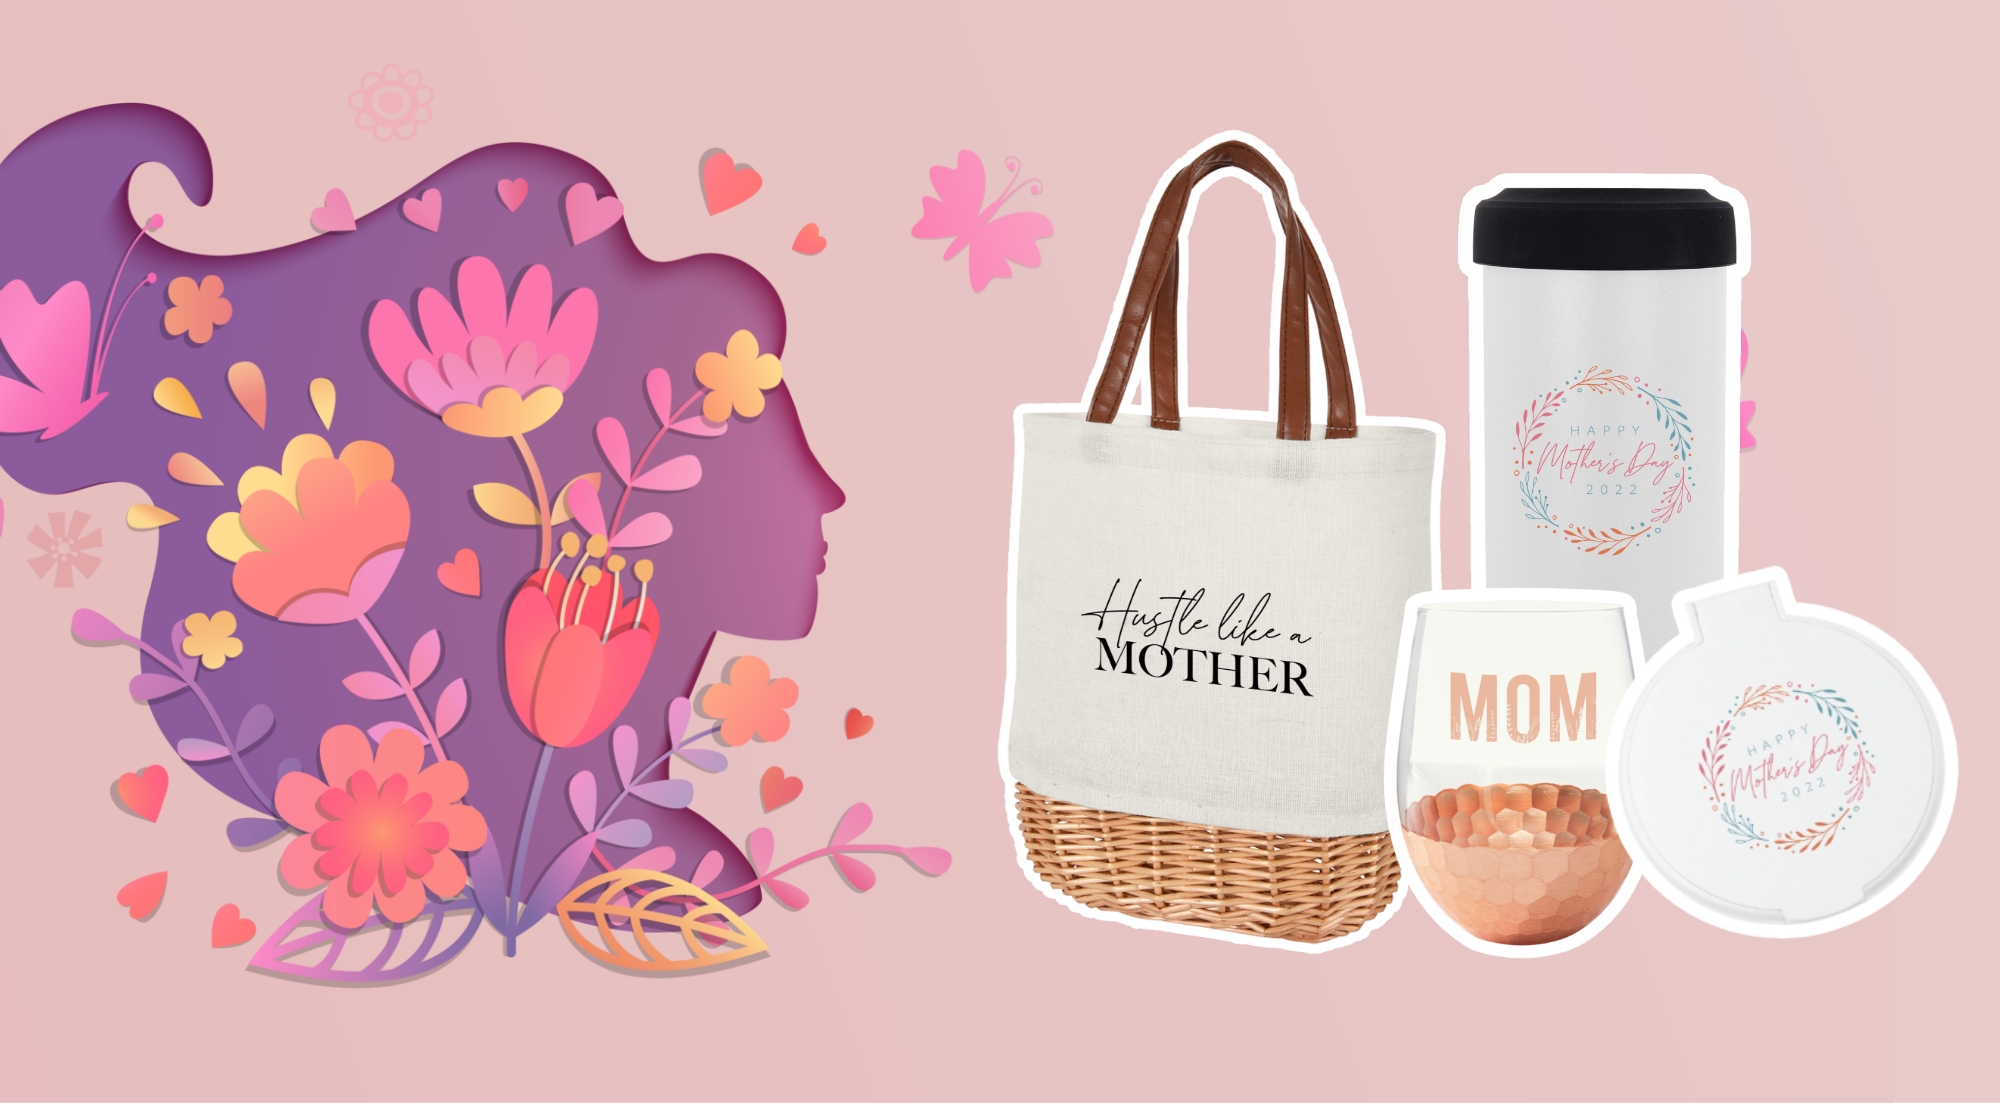 Celebrate Moms with the Custom Mother’s Day Promotional Gifts